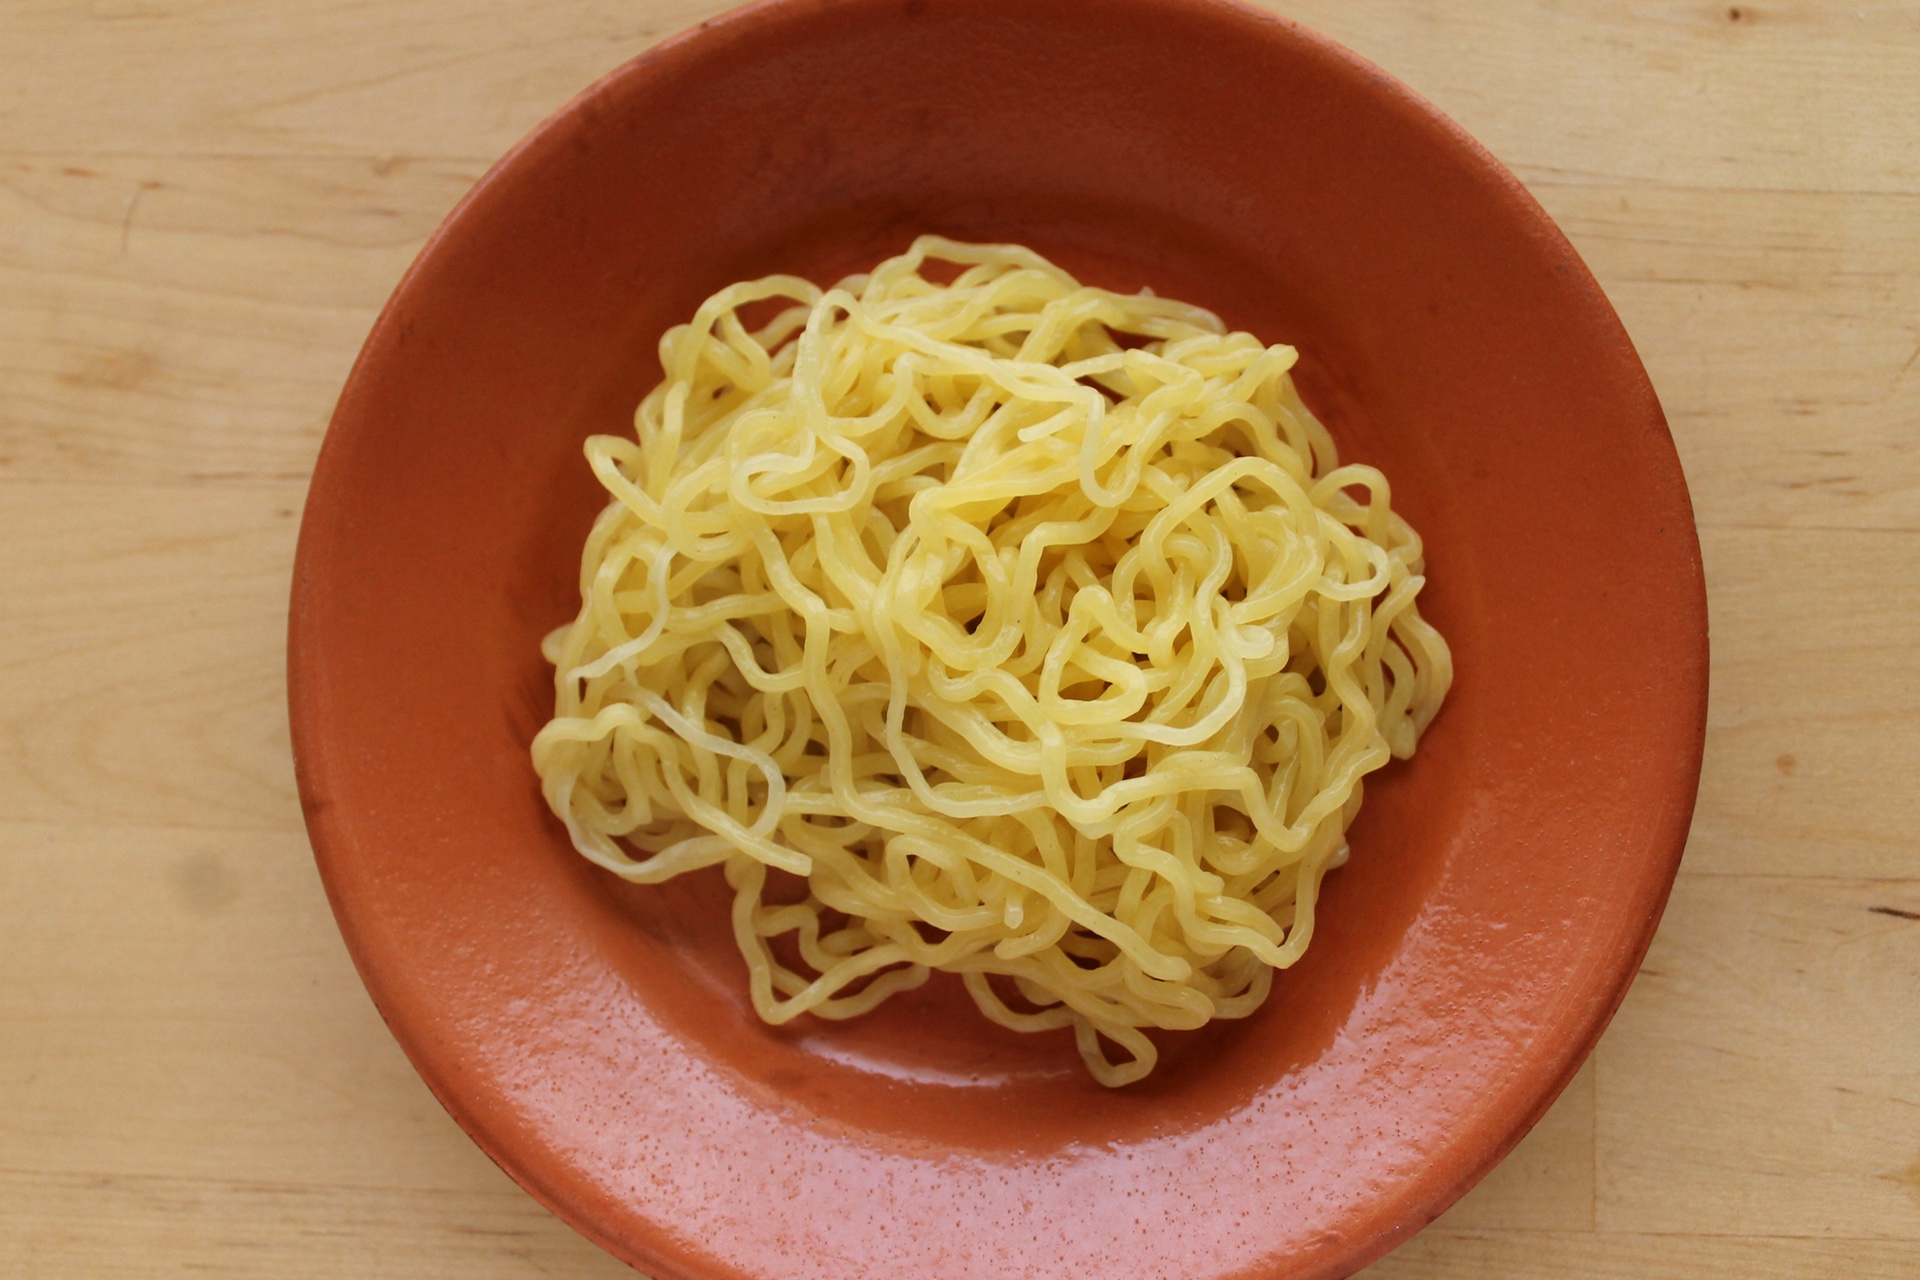 Yamachan’s noodles are made locally in San Jose.